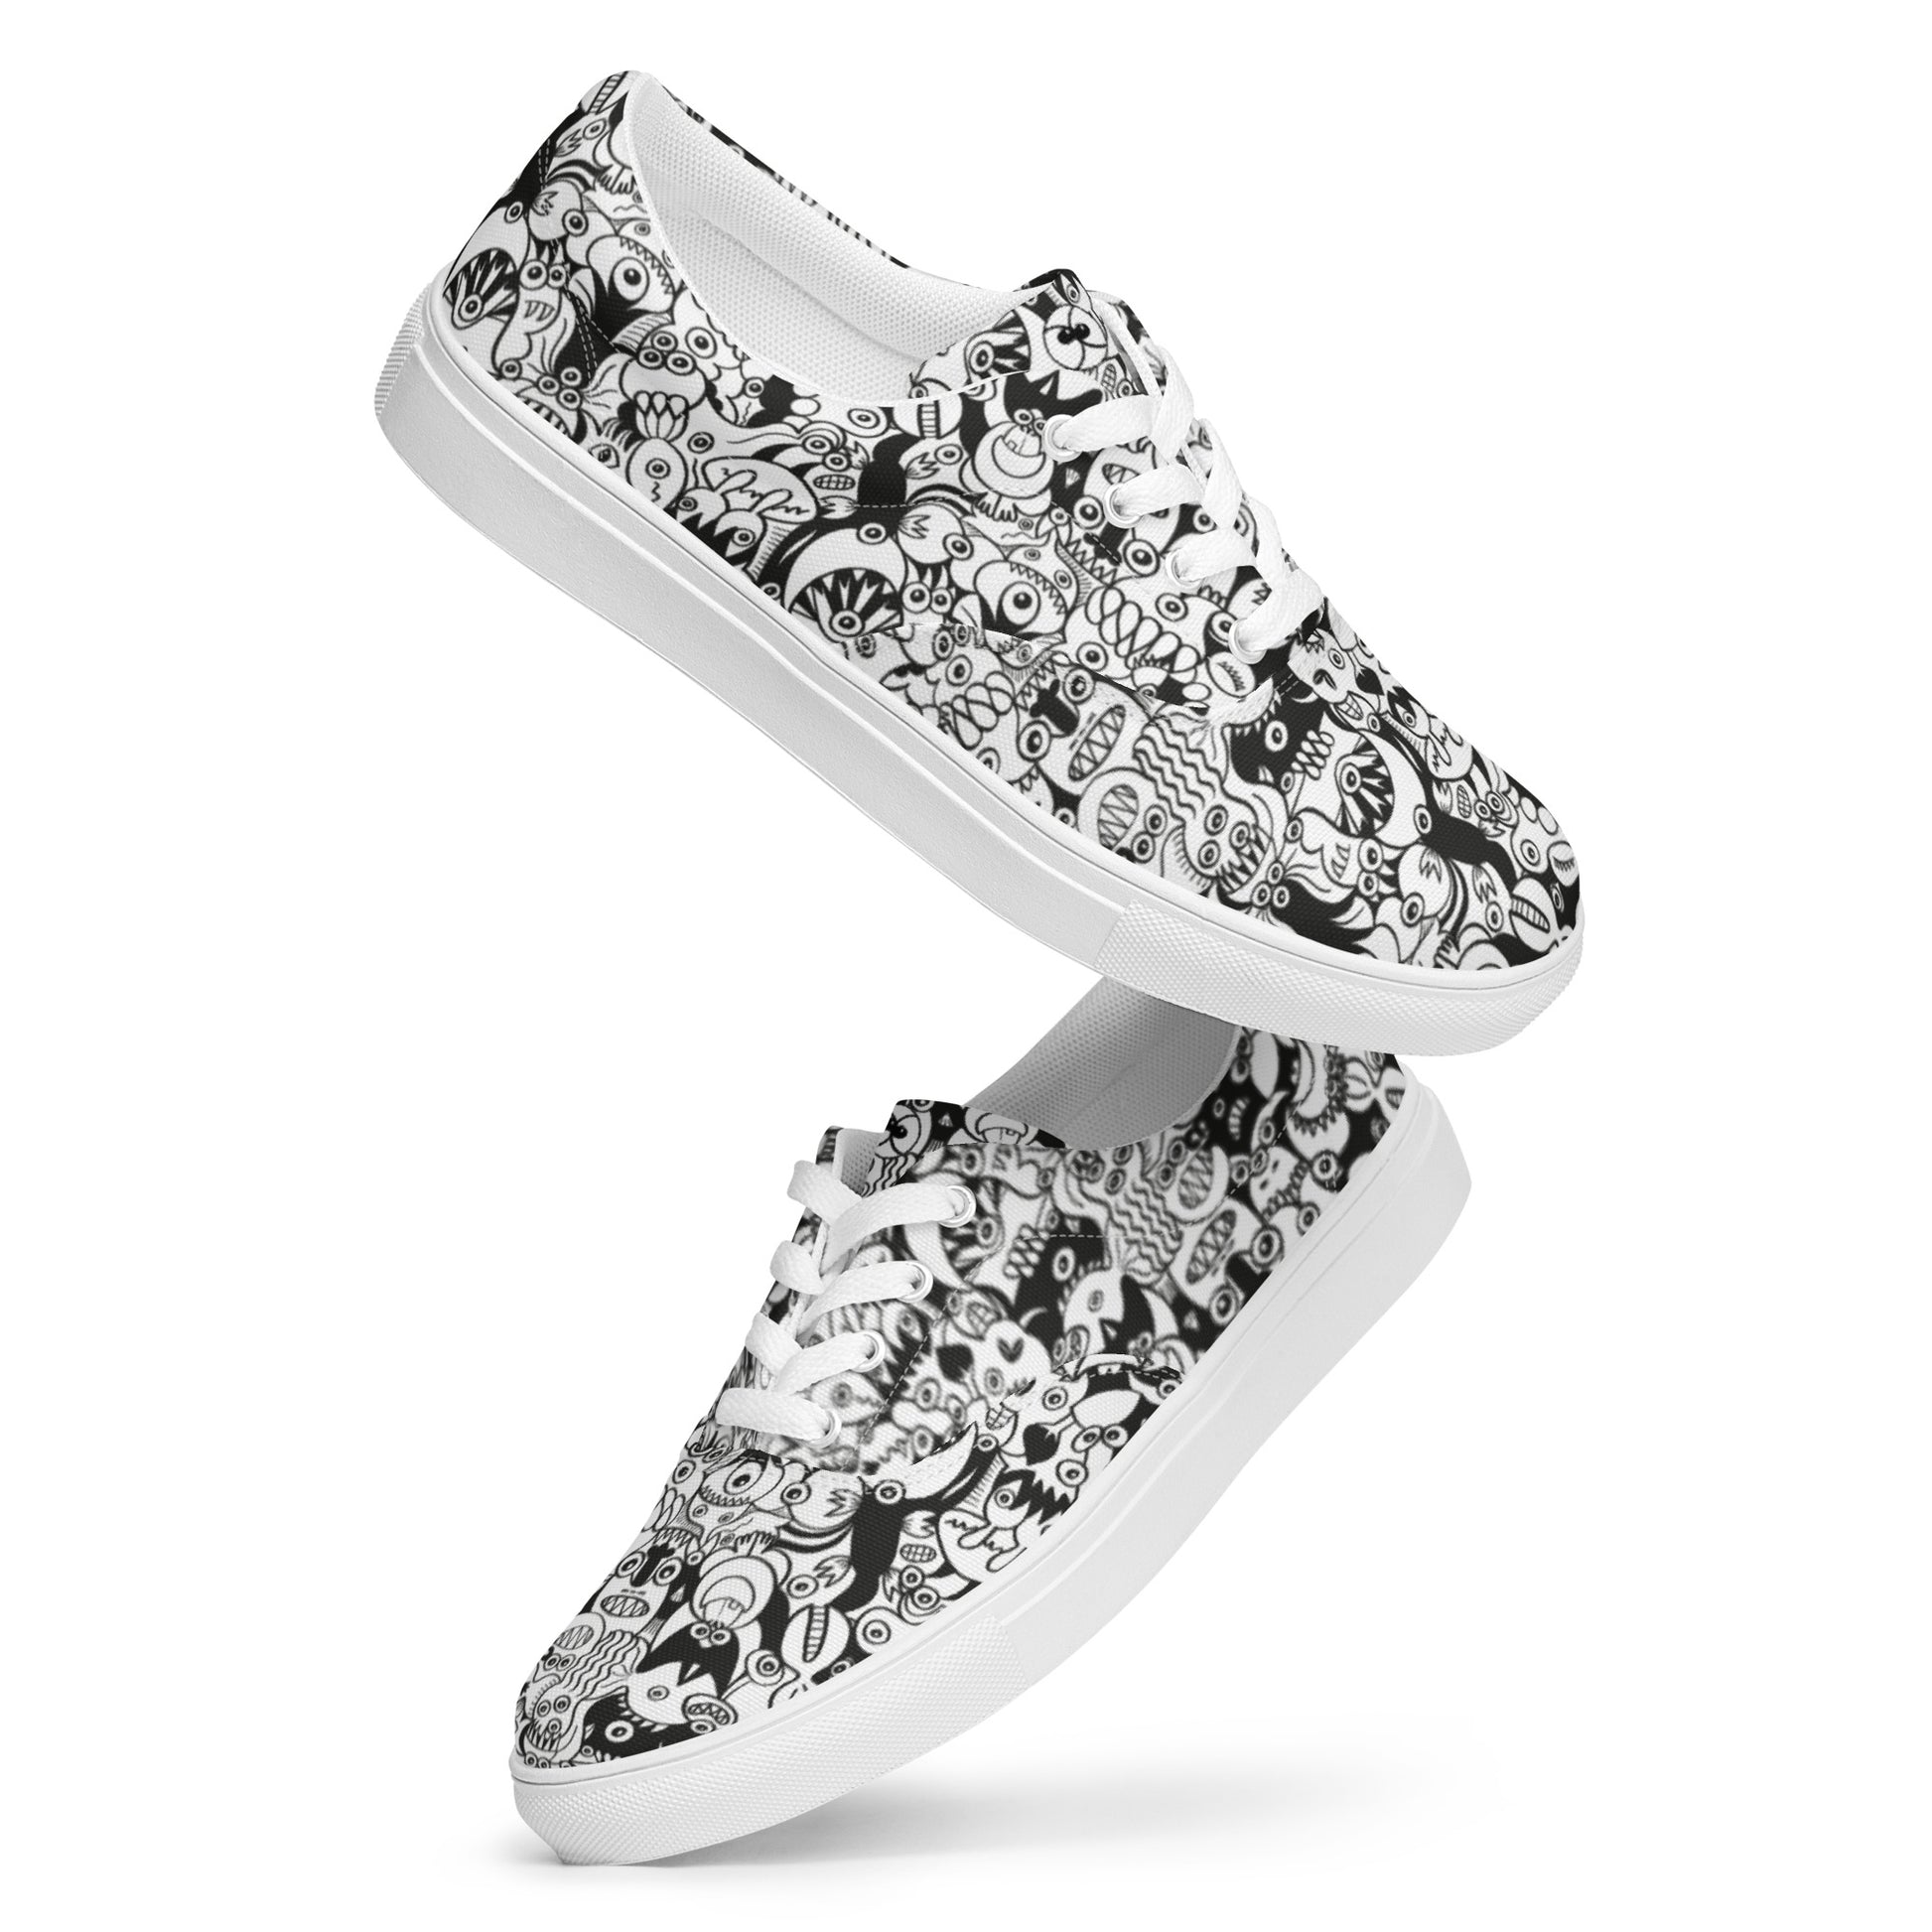 Black and white cool doodles art Women’s lace-up canvas shoes. Playing with shoes